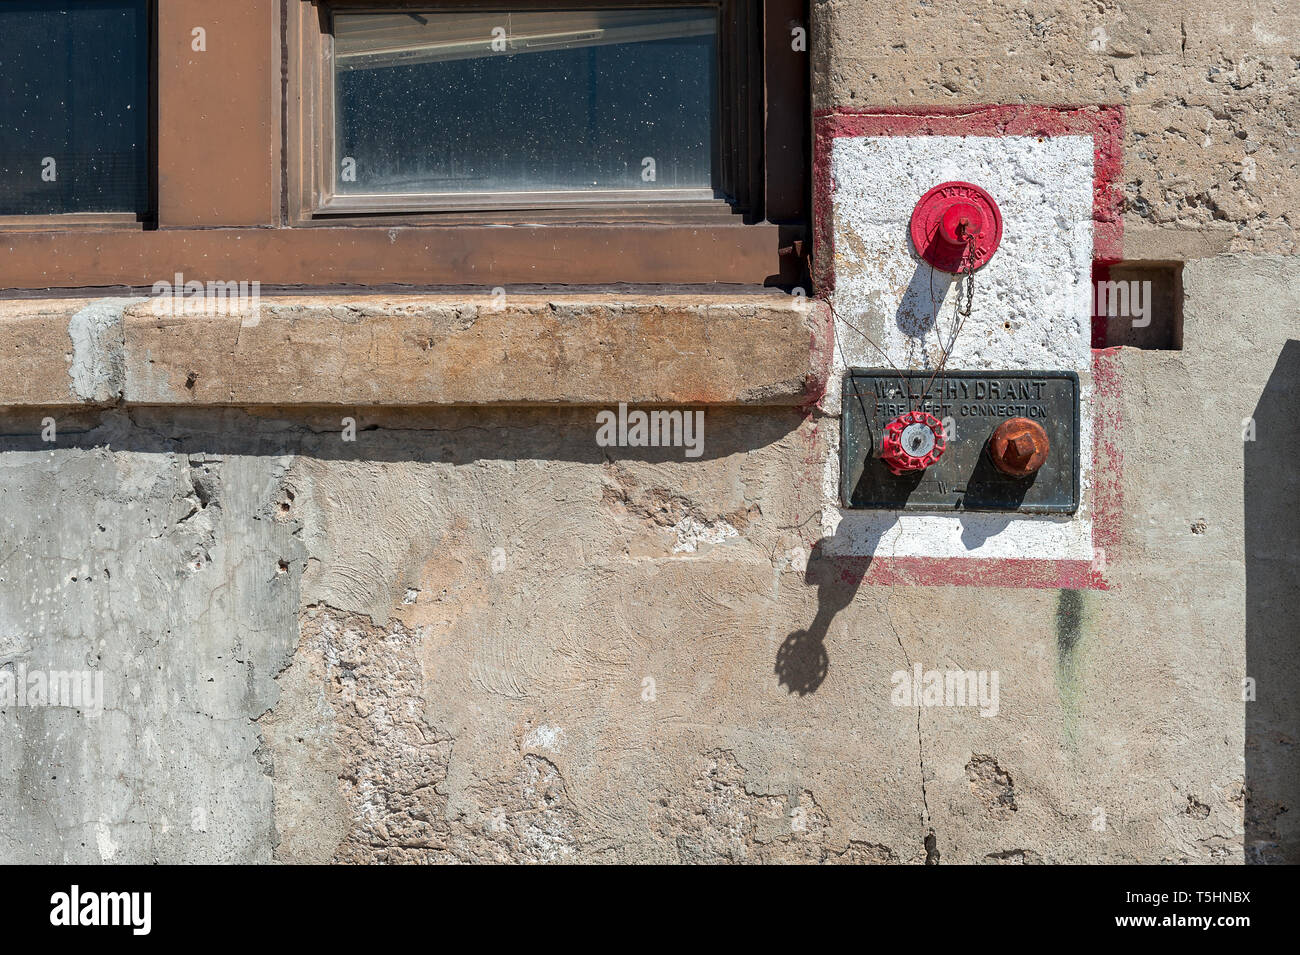 Wall hydrant for fire department connection in a crumbling concrete wall Stock Photo